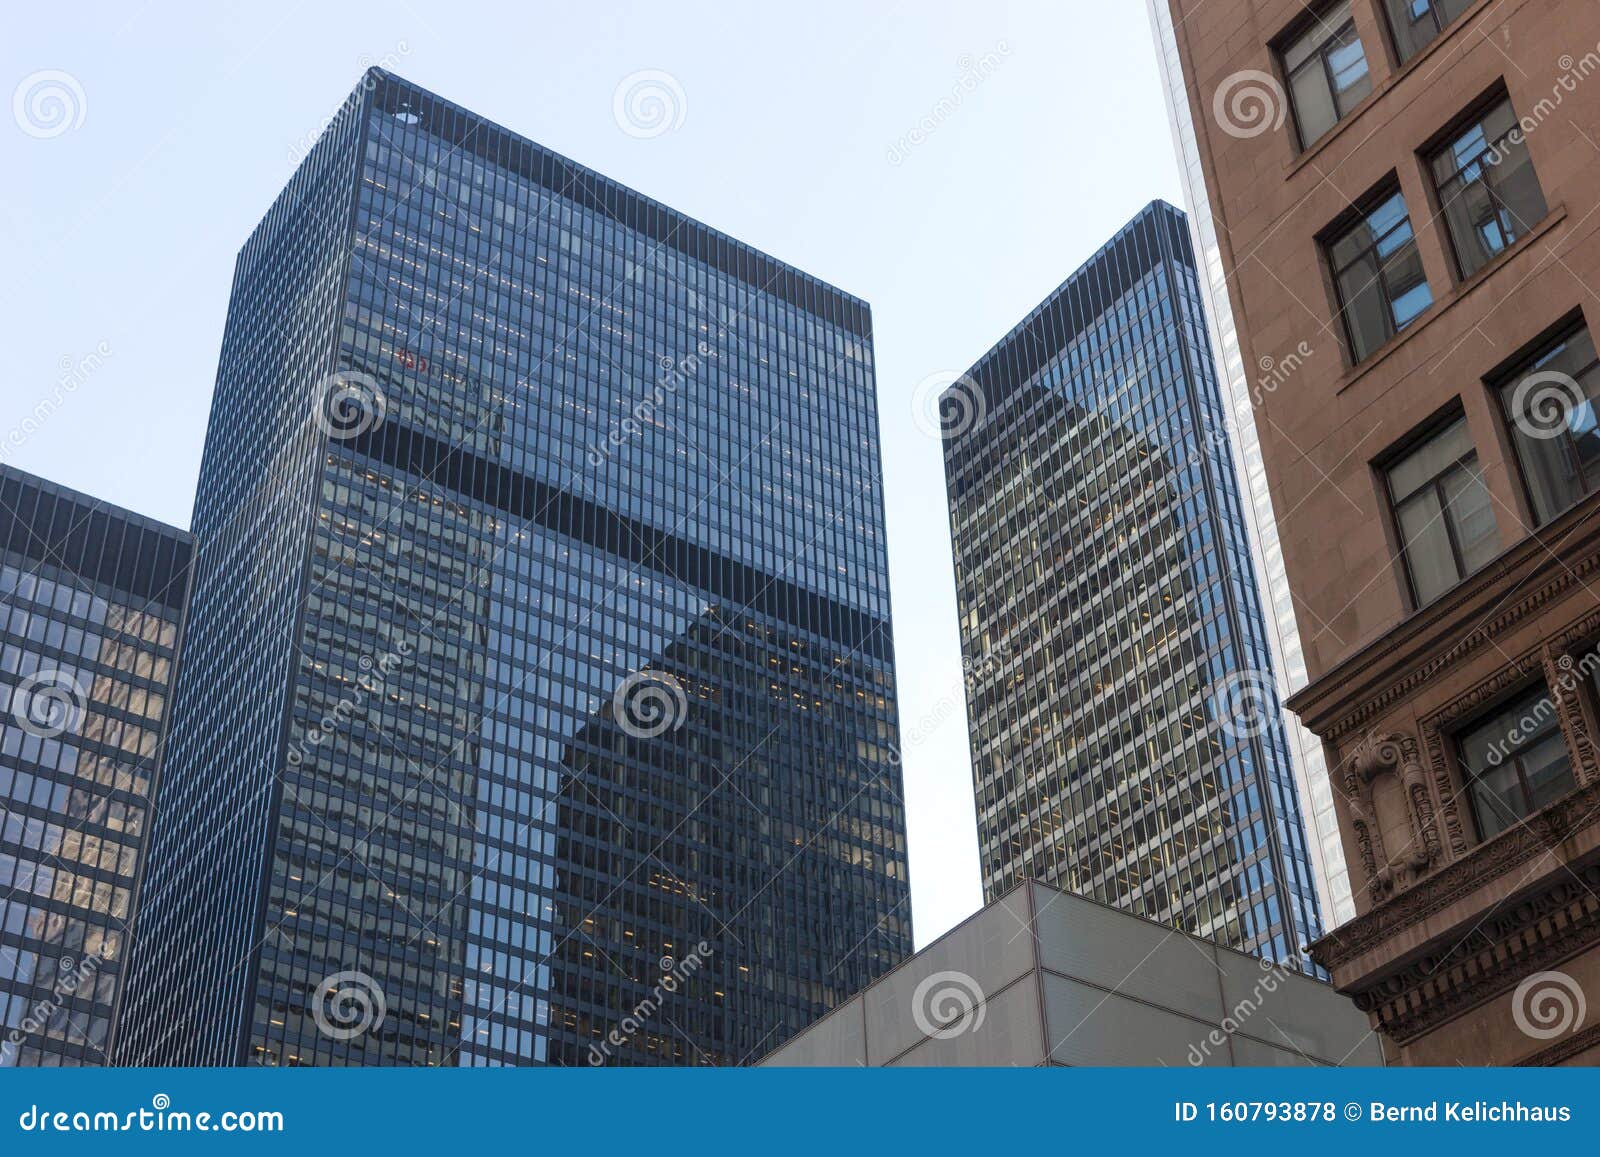 toronto financial district skyline and modern architecture